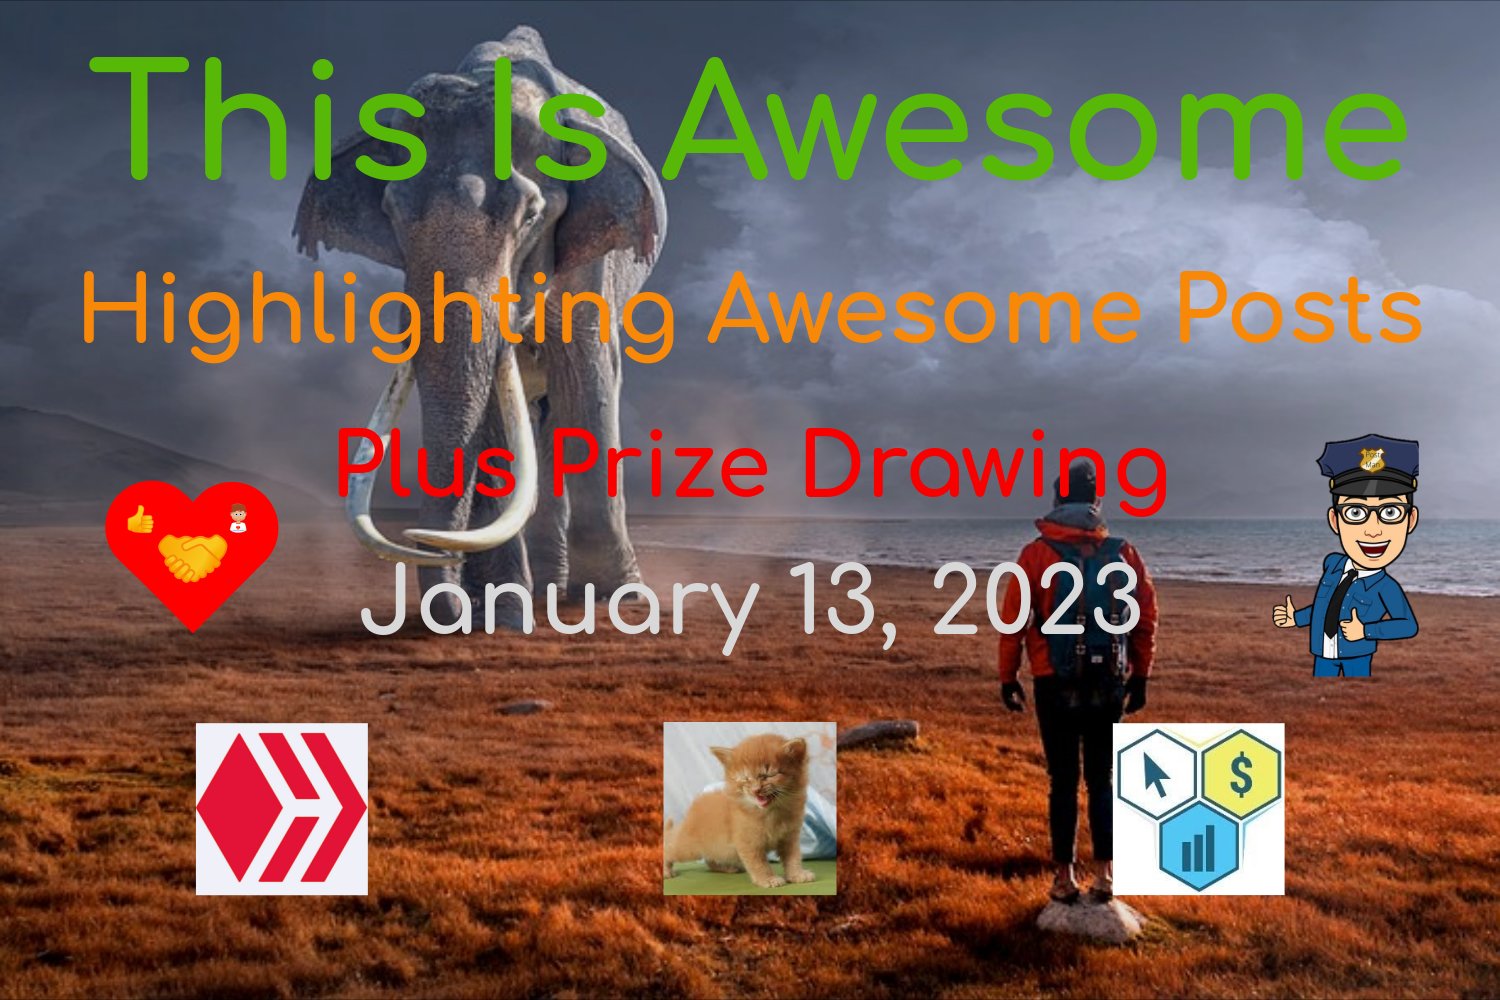 @thisisawesome/this-is-awesome-highlighting-awesome-posts-plus-prize-drawing-january-13-2023